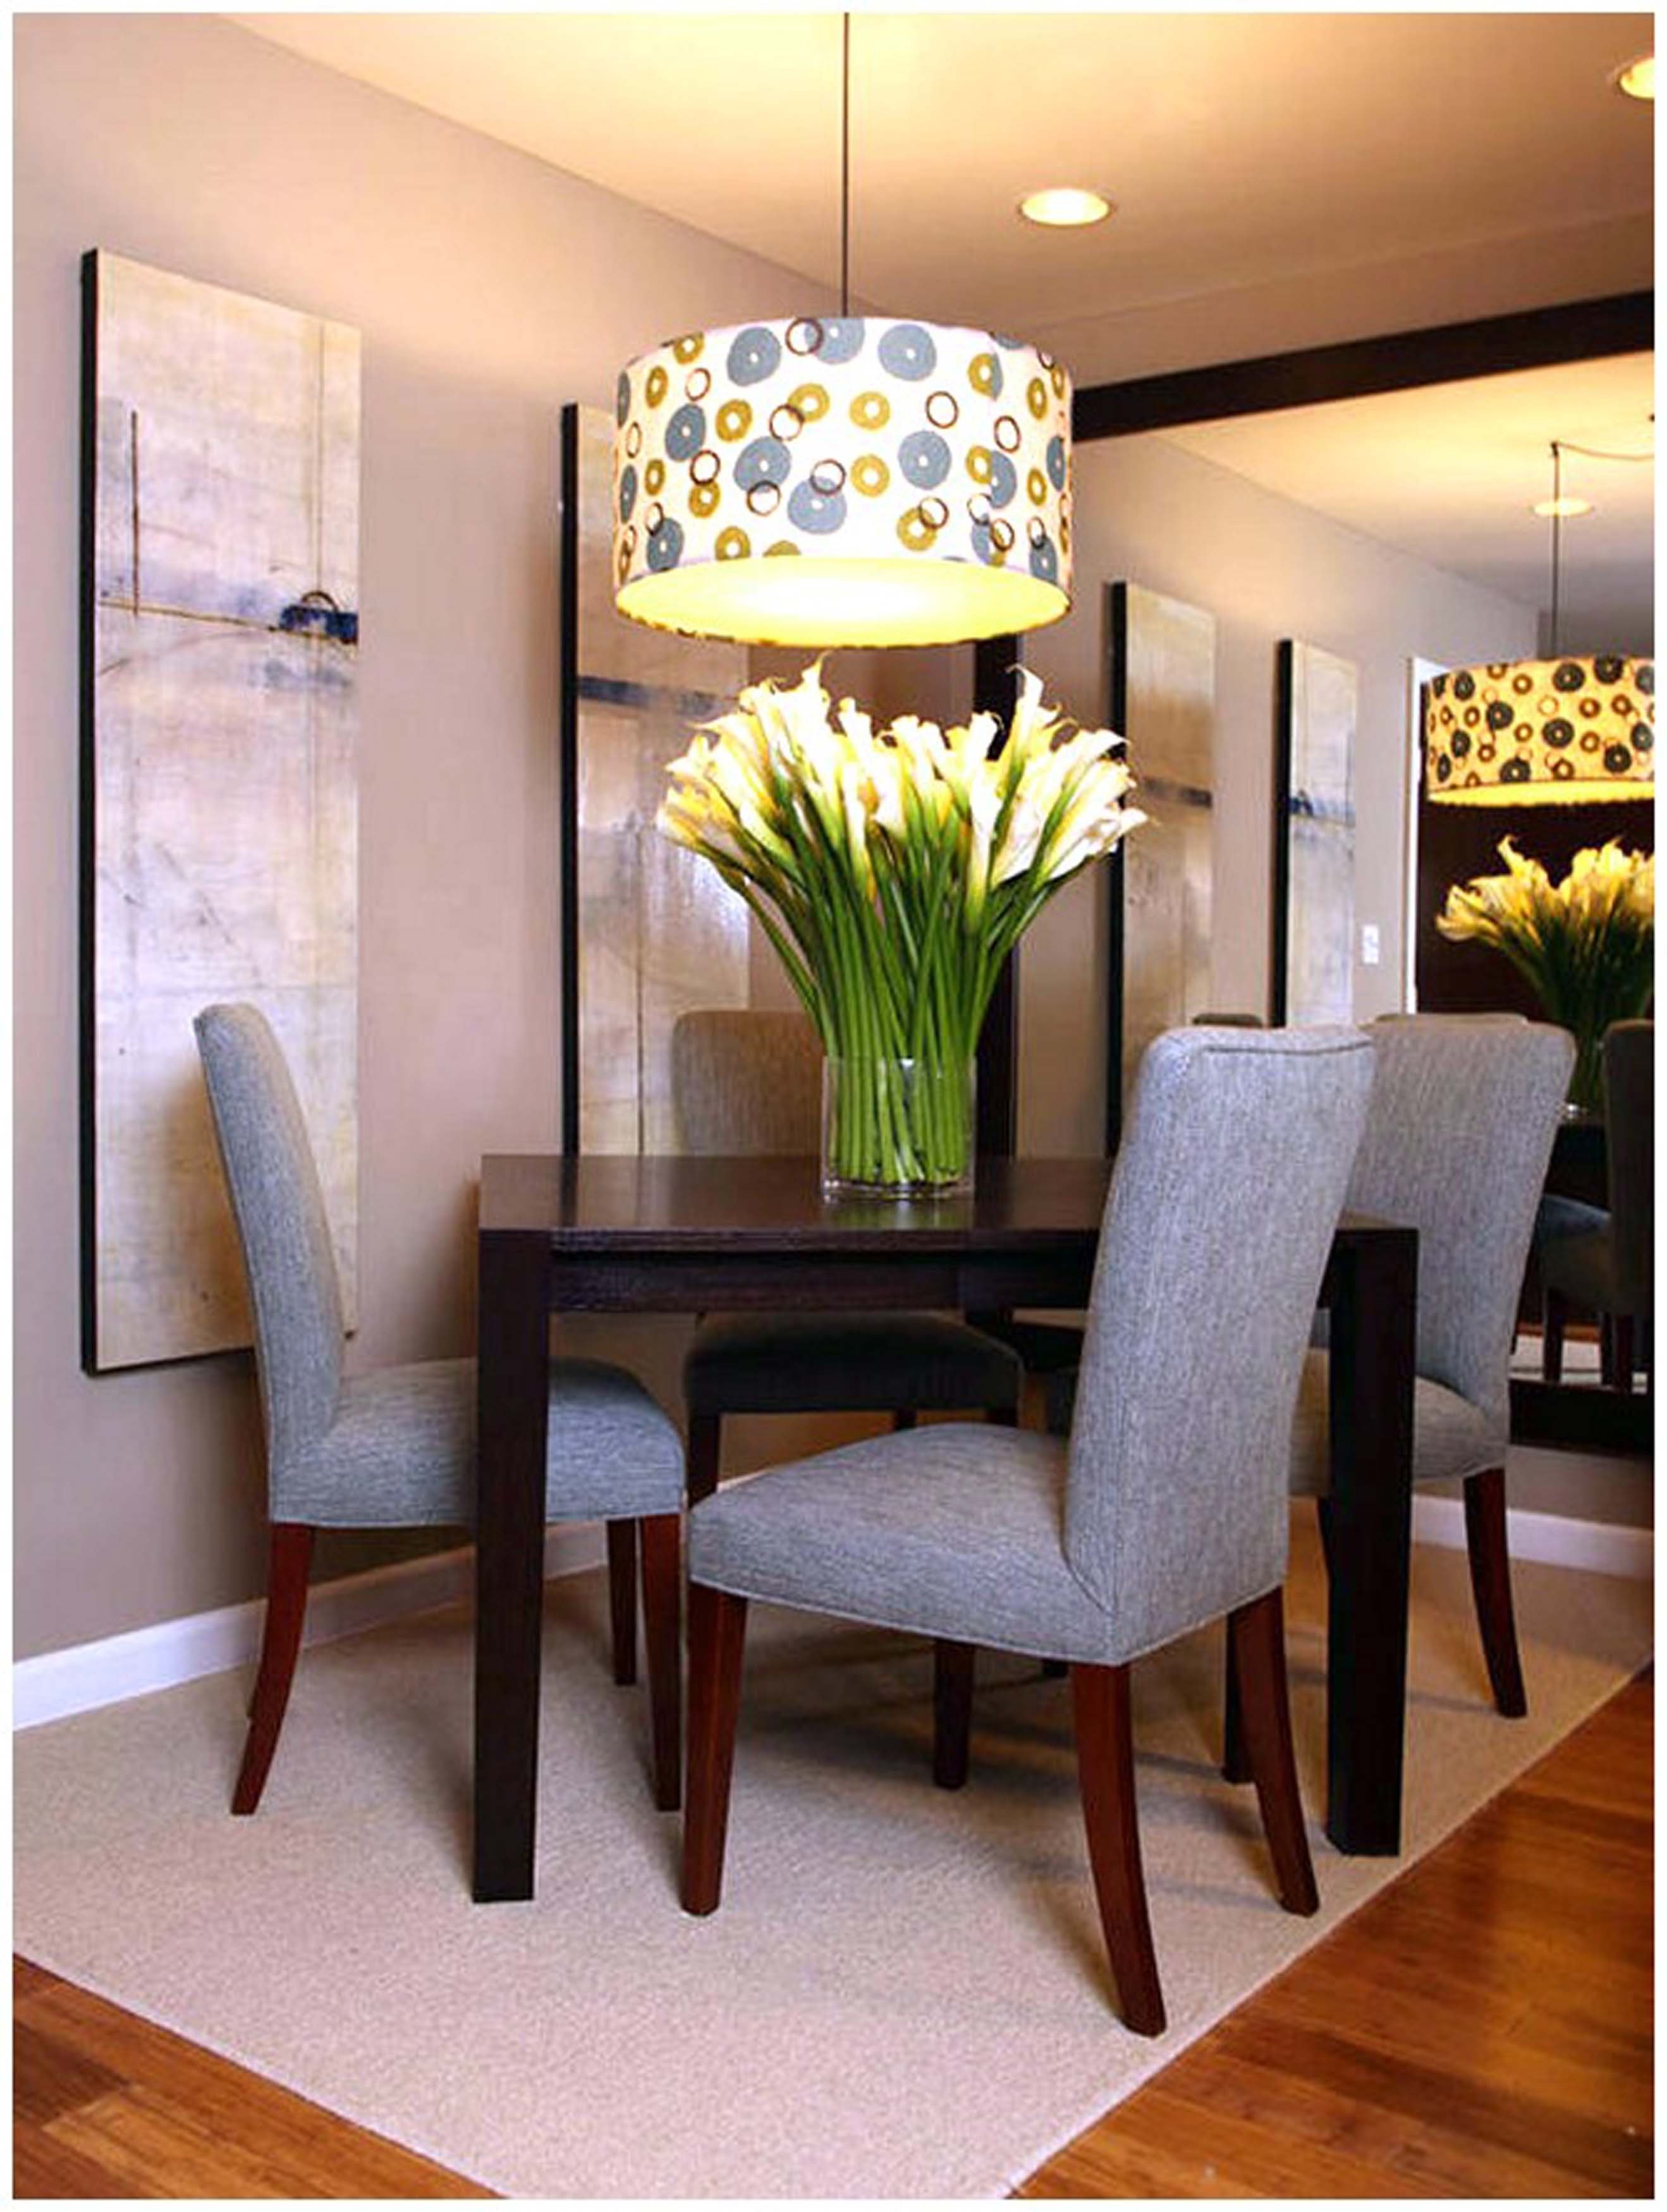 10 Perfect Small Apartment Dining Room Ideas apartments apartment dining room ideas chandelier black table 2022